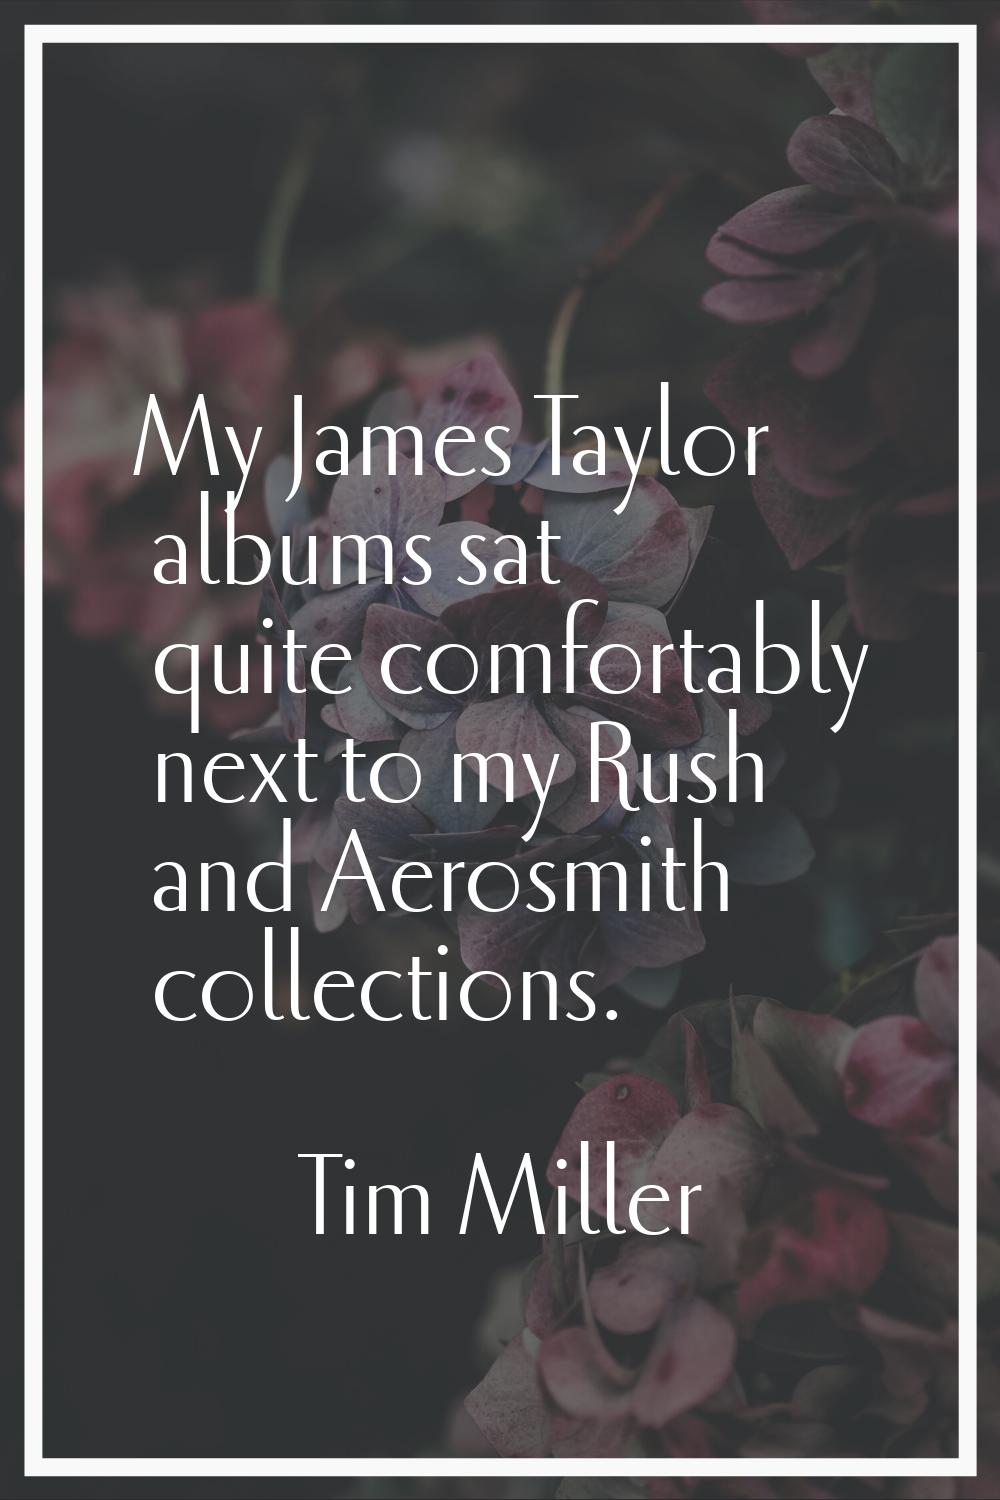 My James Taylor albums sat quite comfortably next to my Rush and Aerosmith collections.